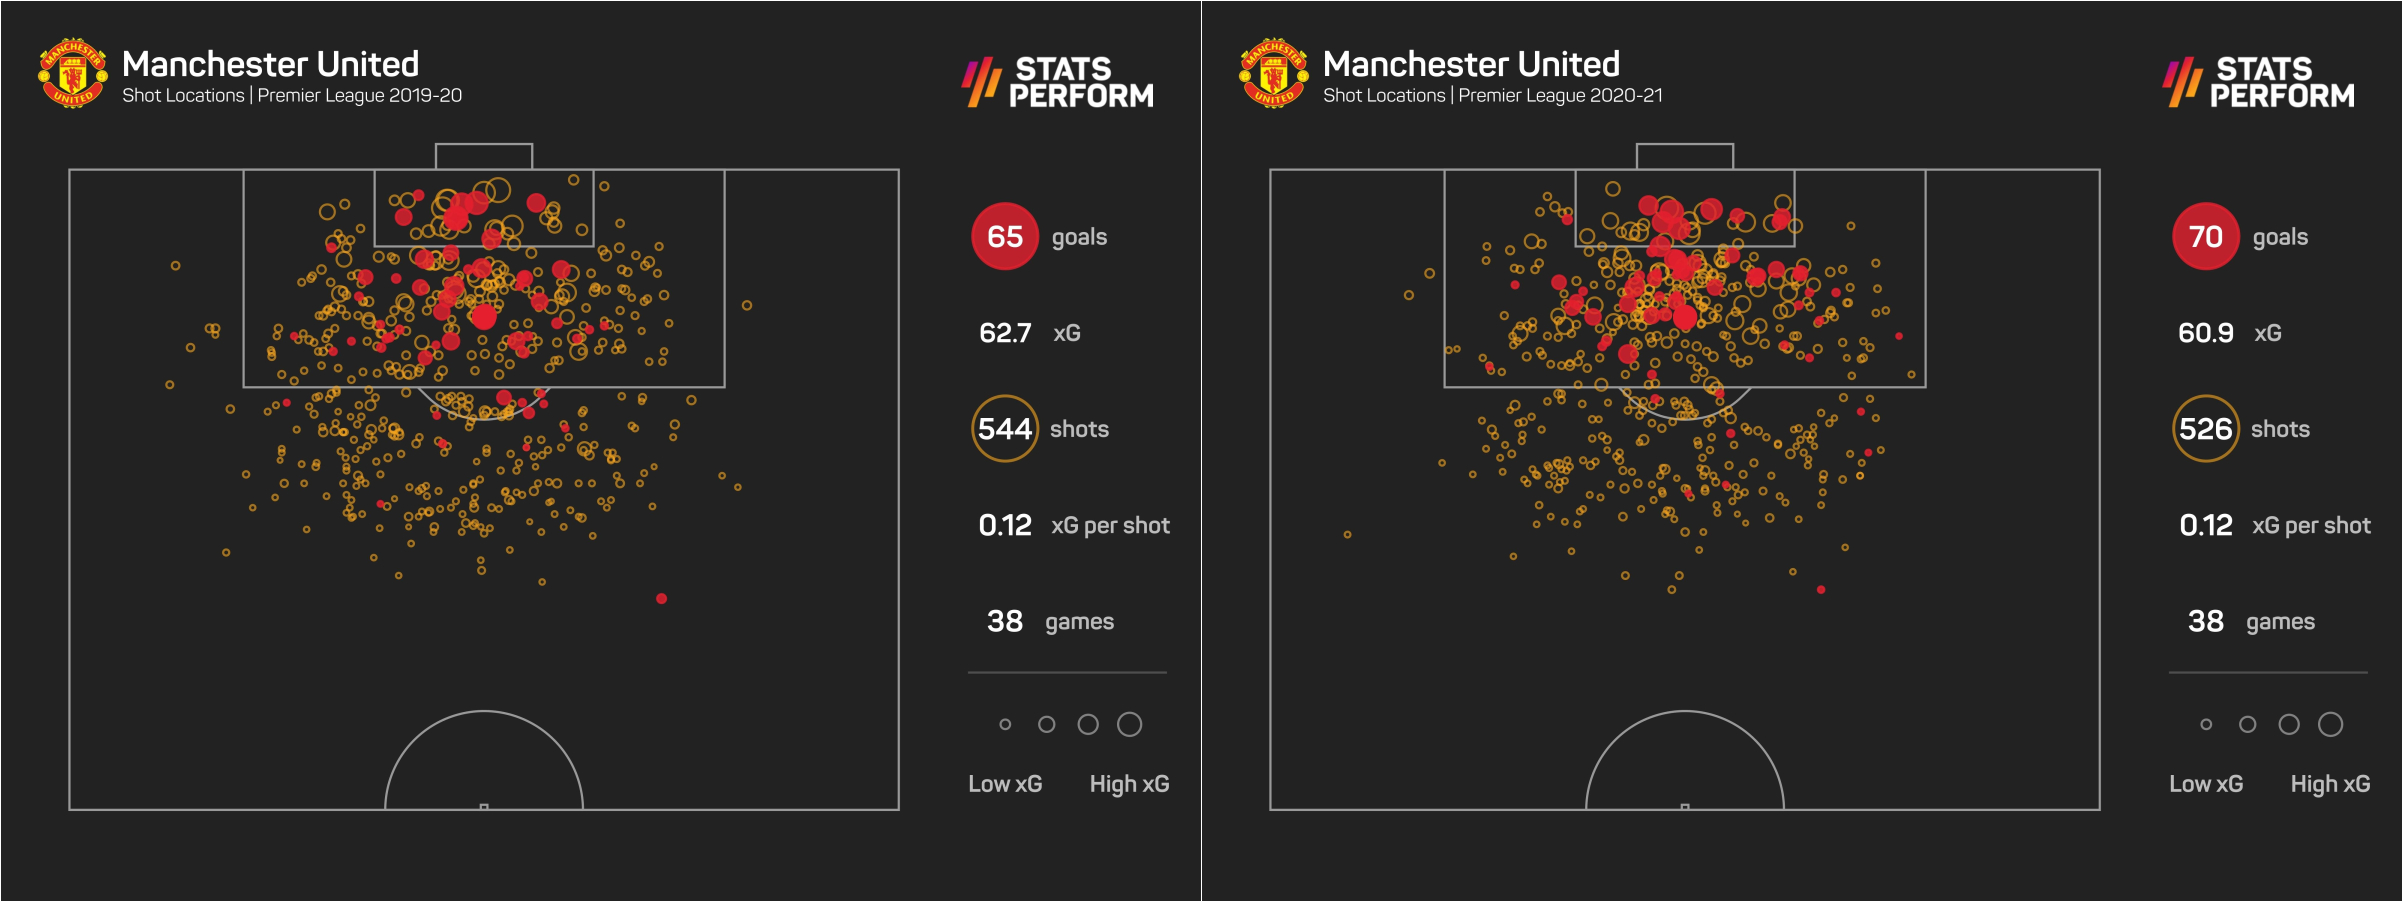 Man Utd shots from 2019-20 to 2020-21